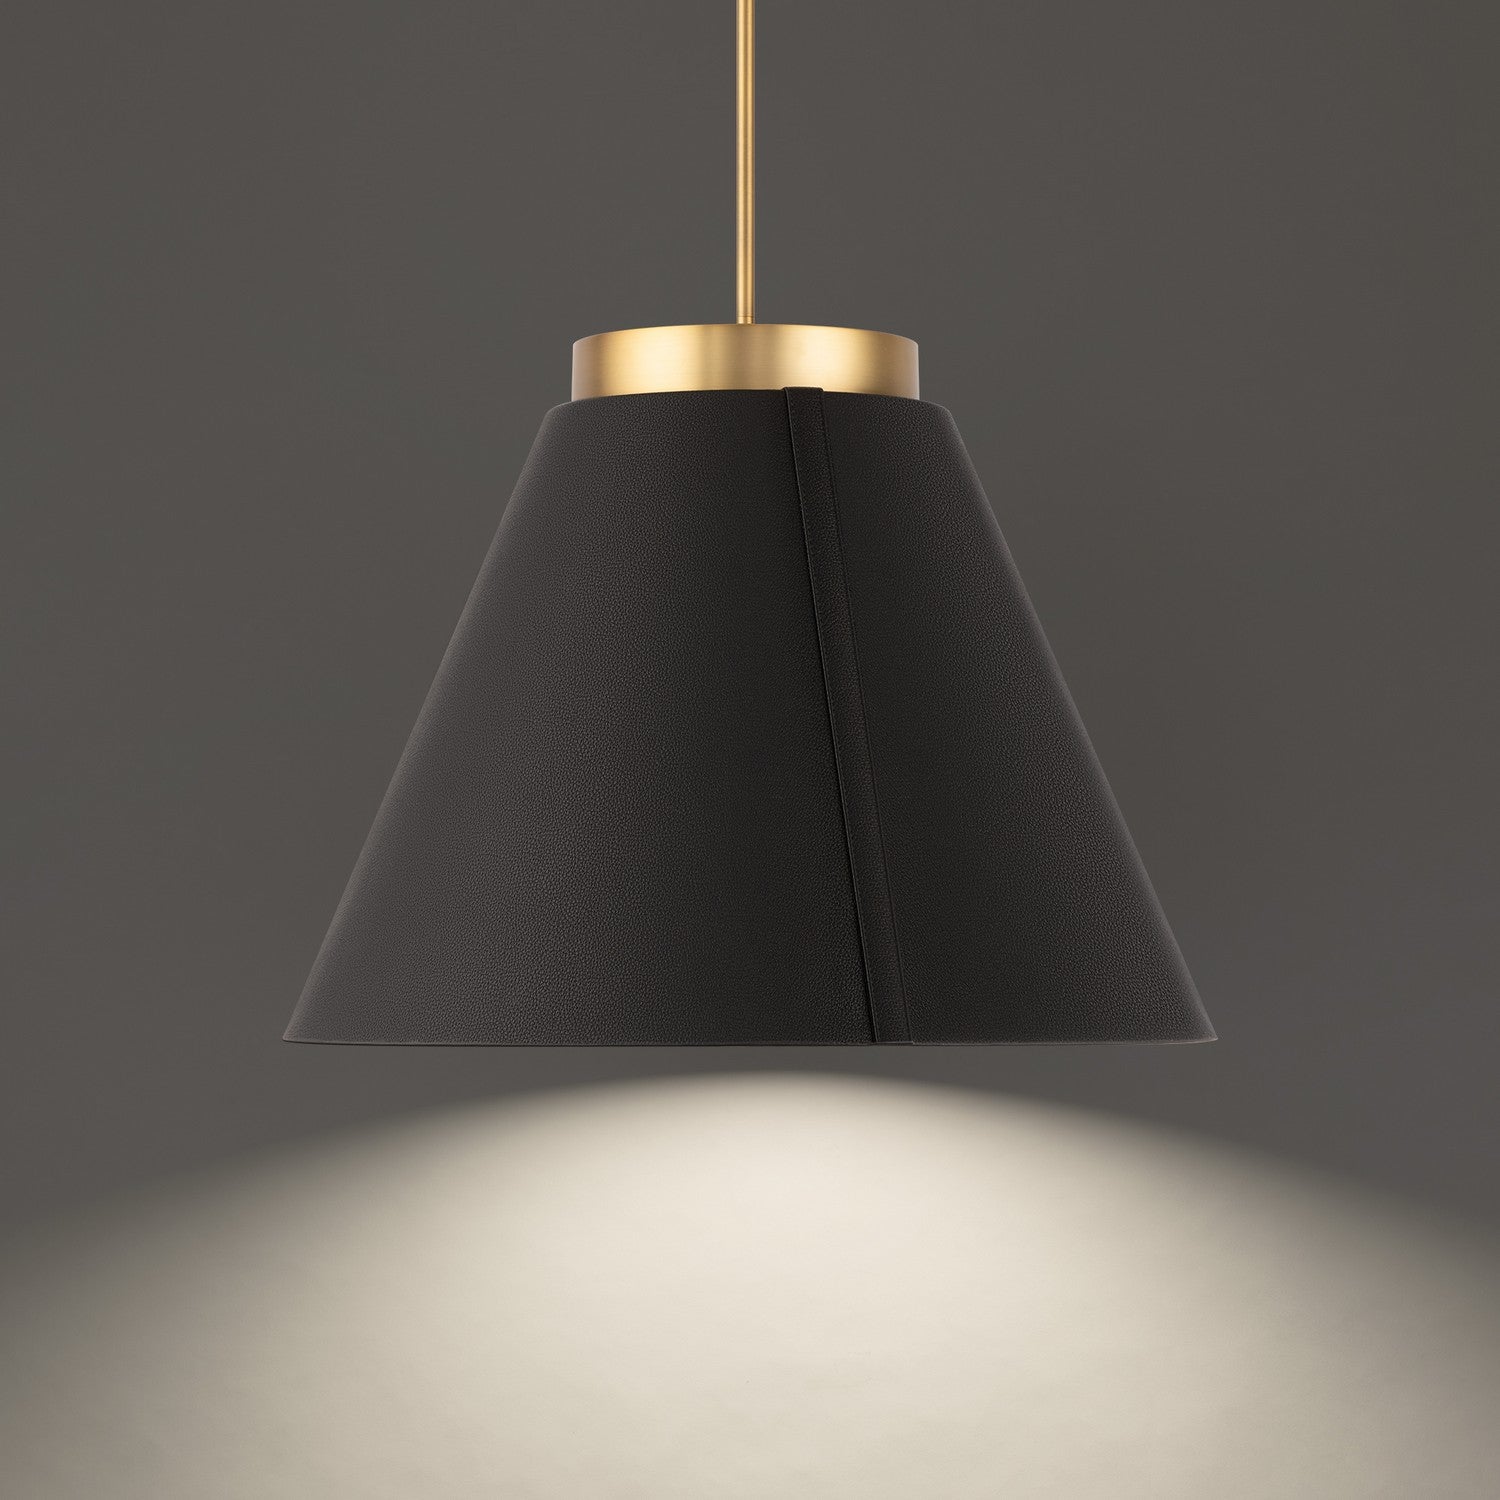 Modern Forms Canada - PD-88324-BK/AB - LED Pendant - Bentley - Black & Aged Brass